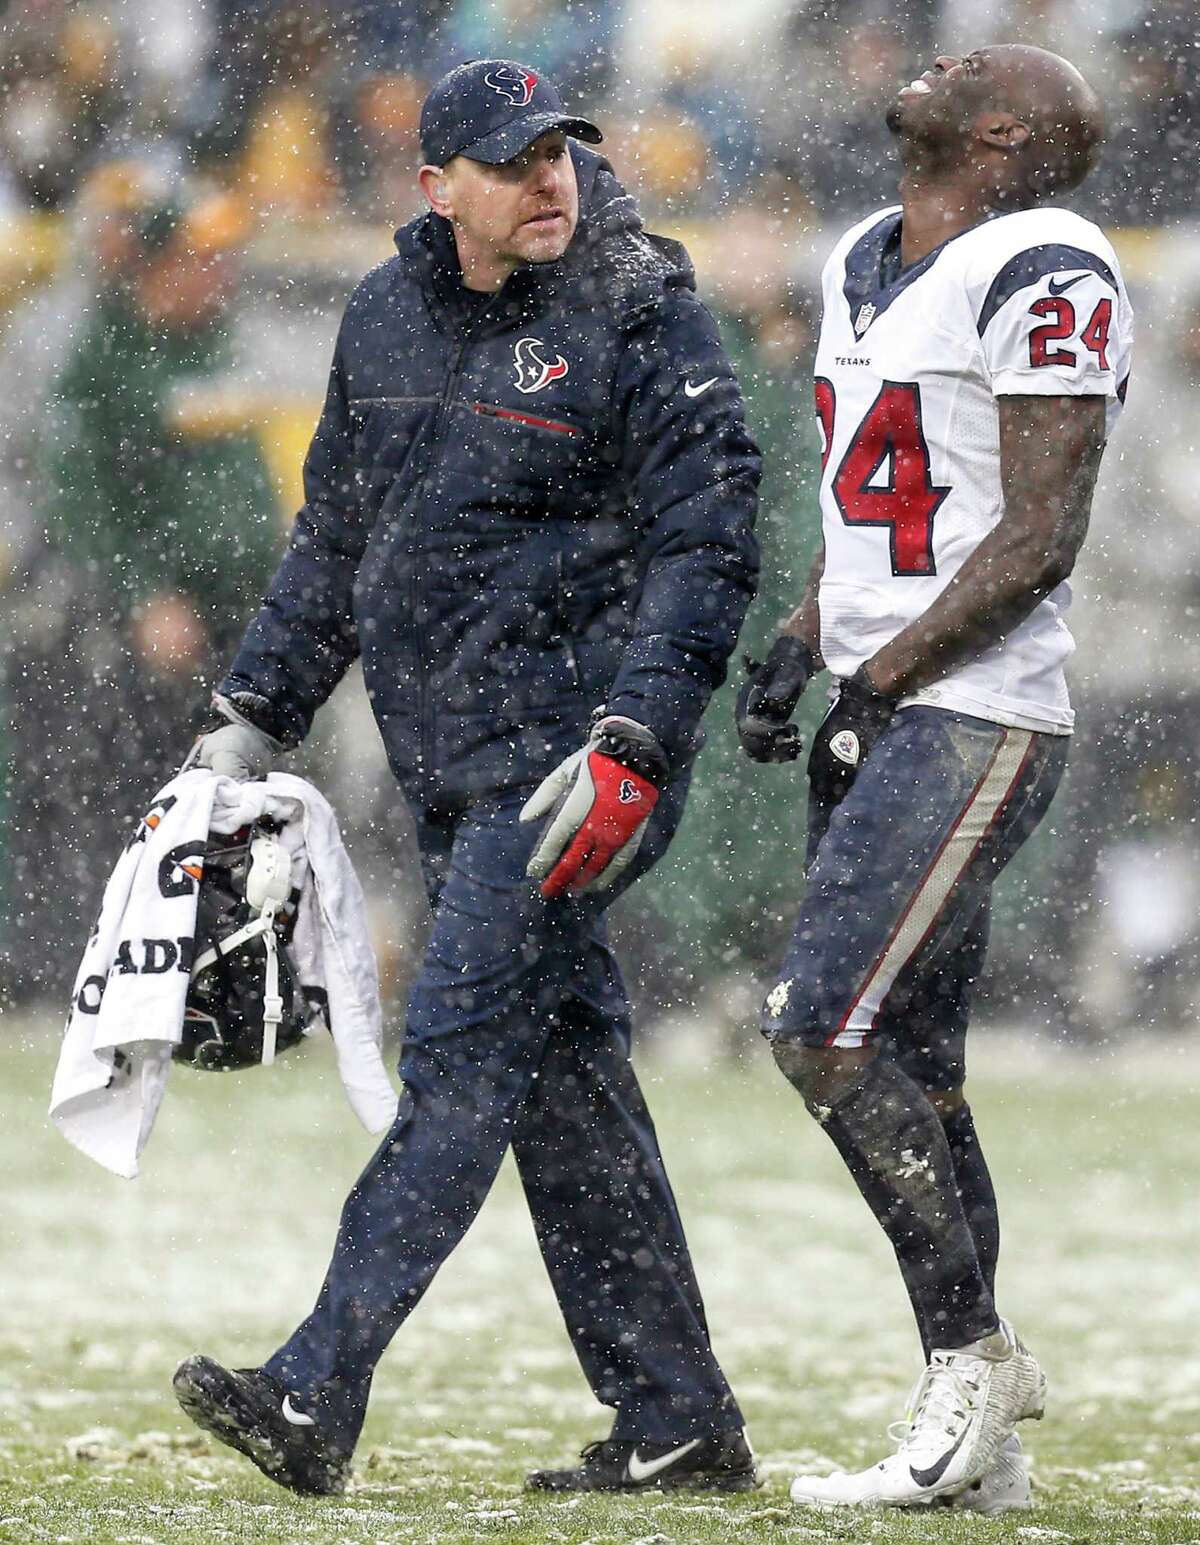 Houston Texans cornerback Johnathan Joseph (24) walks off the field with trainer Geoff Kaplan after suffering an injury during the third quarter of an NFL football game against the Green Bay Packers at Lambeau Field on Sunday, Dec. 4, 2016, in Green Bay.